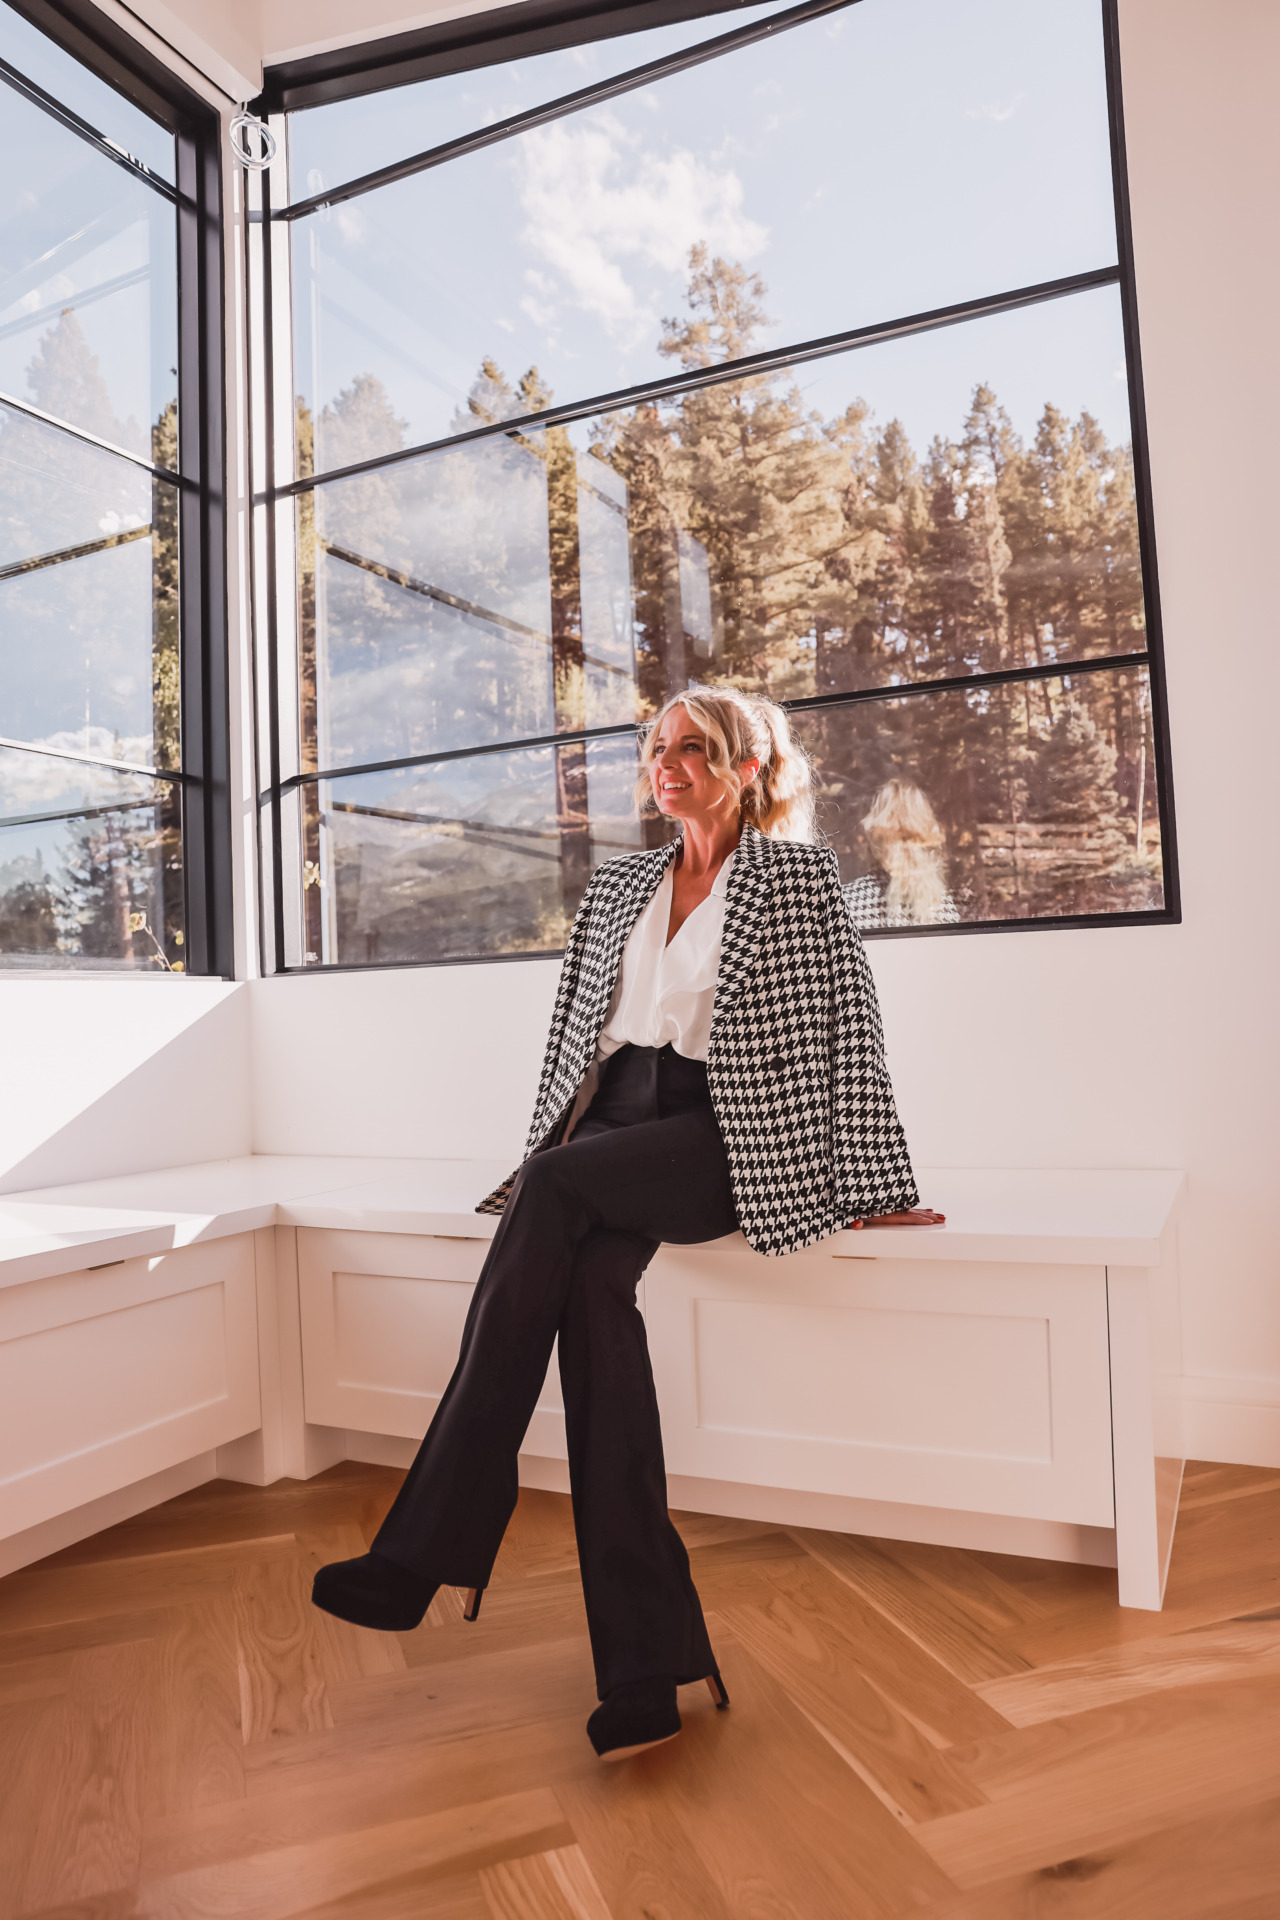 style course, fashion style course online, personal style course, fashion styling courses, influencer fashion course, fashion course, simple style course, style made simple, erin busbee, busbee style, fashion over 40, wardrobe basics, wardrobe must0haves, style course online 